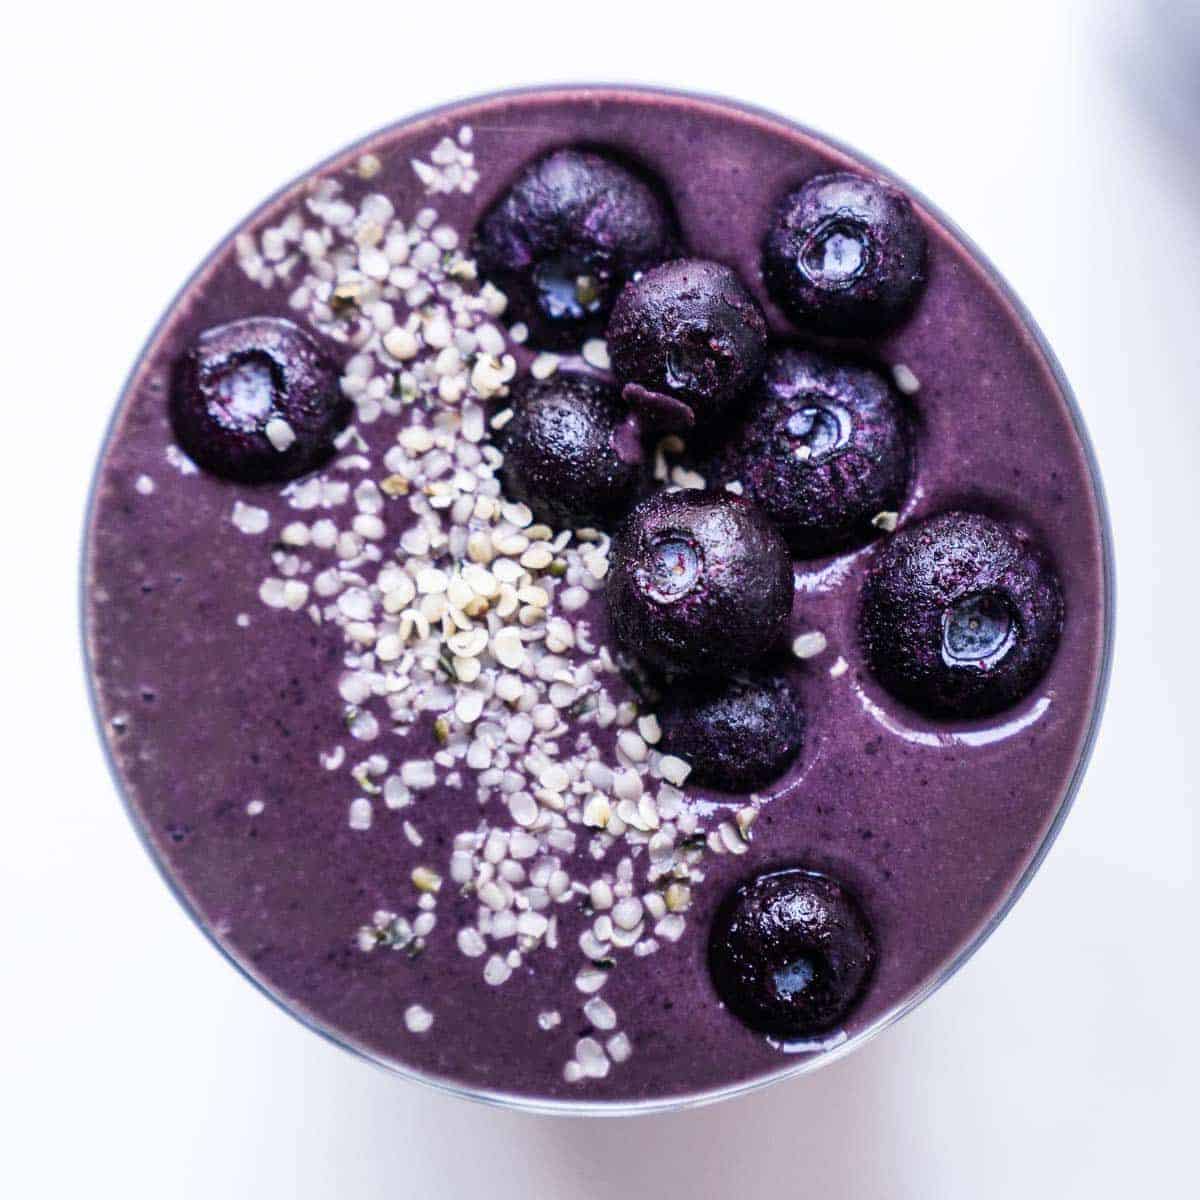 Blueberry Spinach Smoothie (Quick & Easy!)